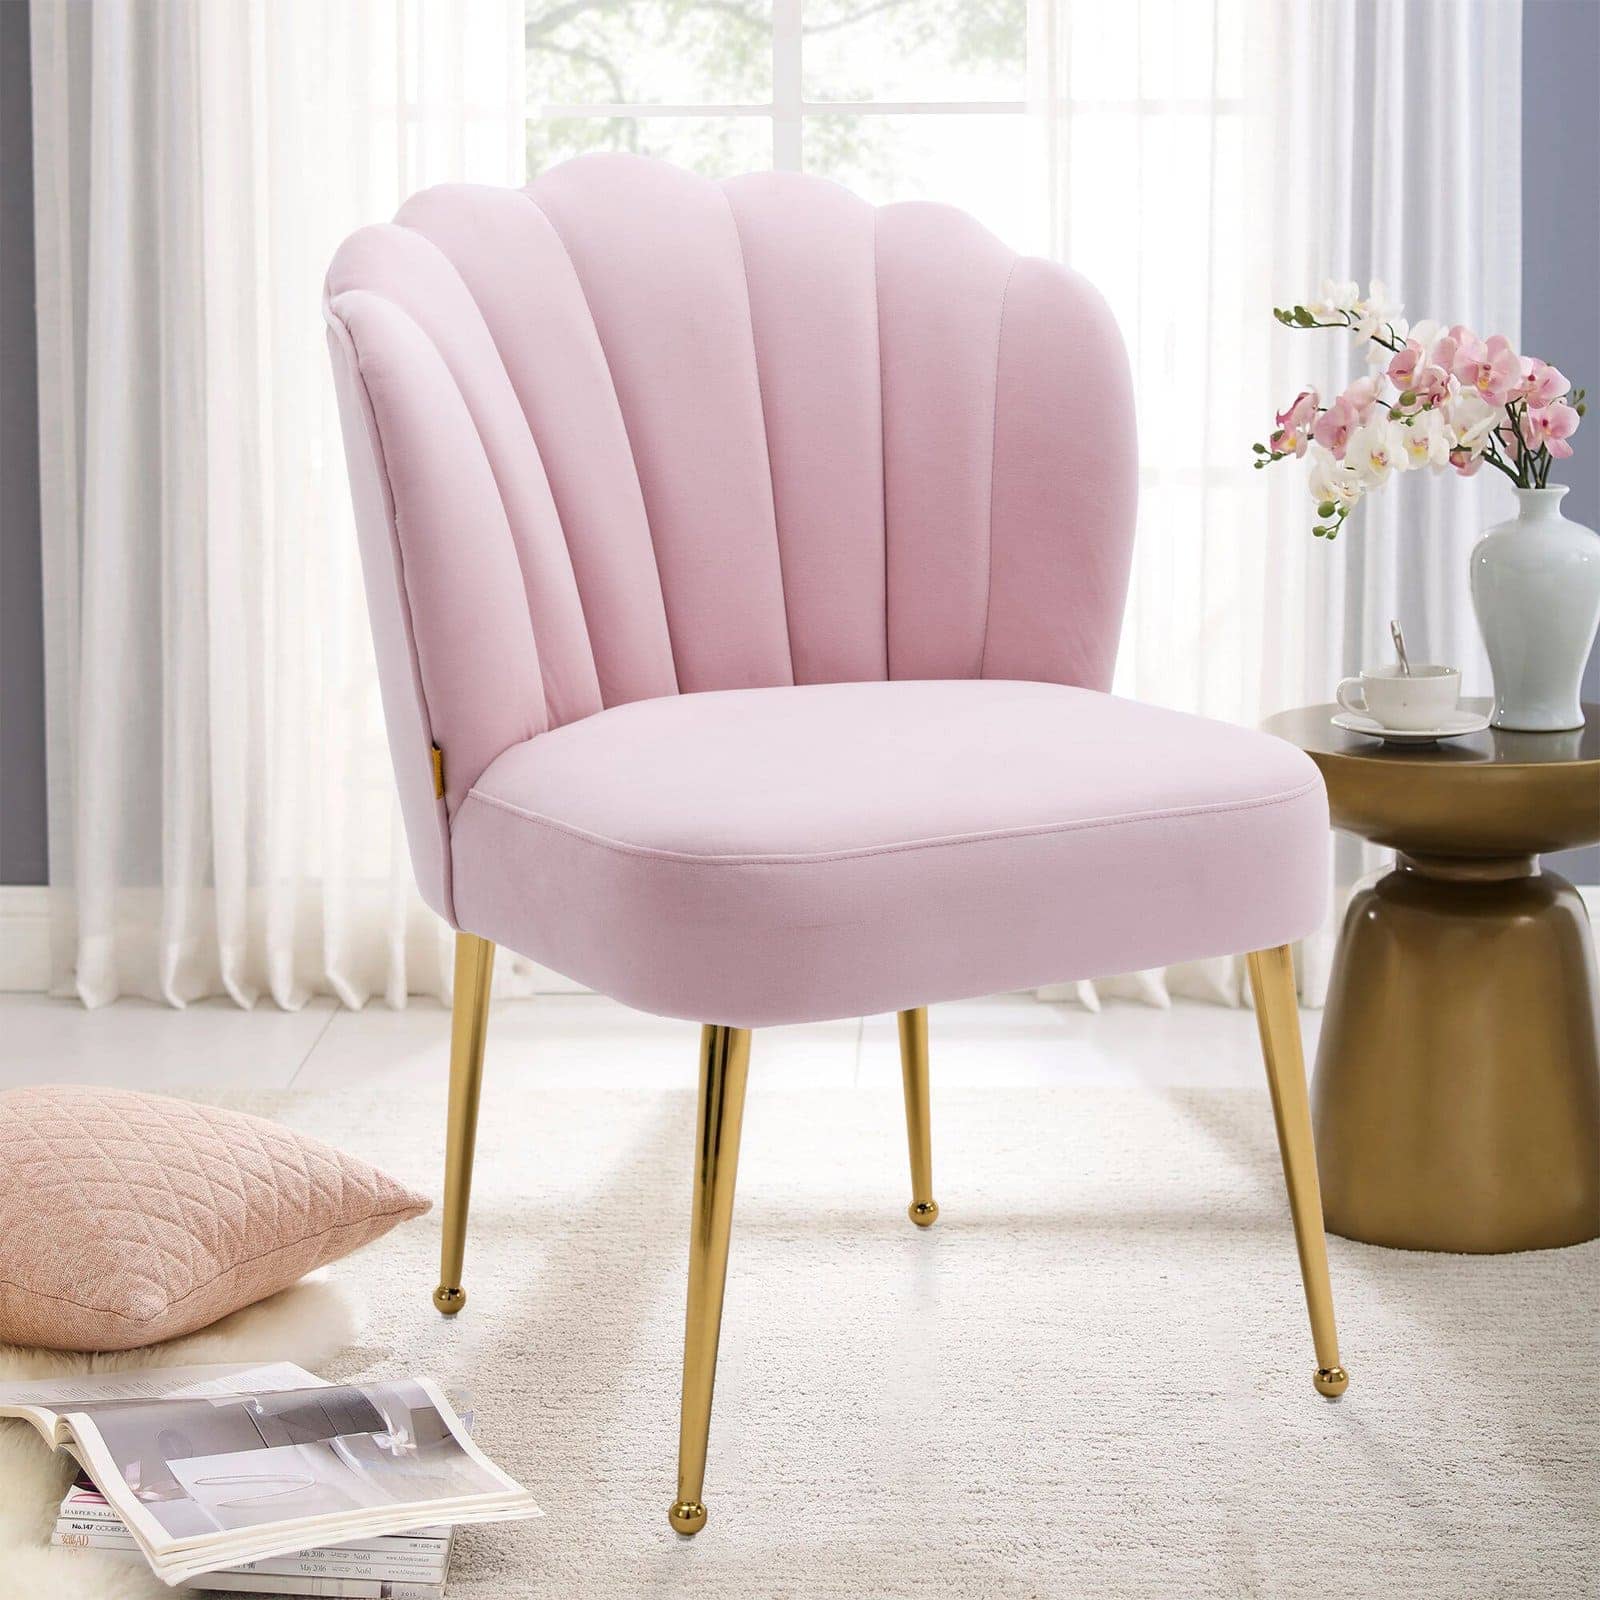 Pink and Gold Glam Bedroom Chair